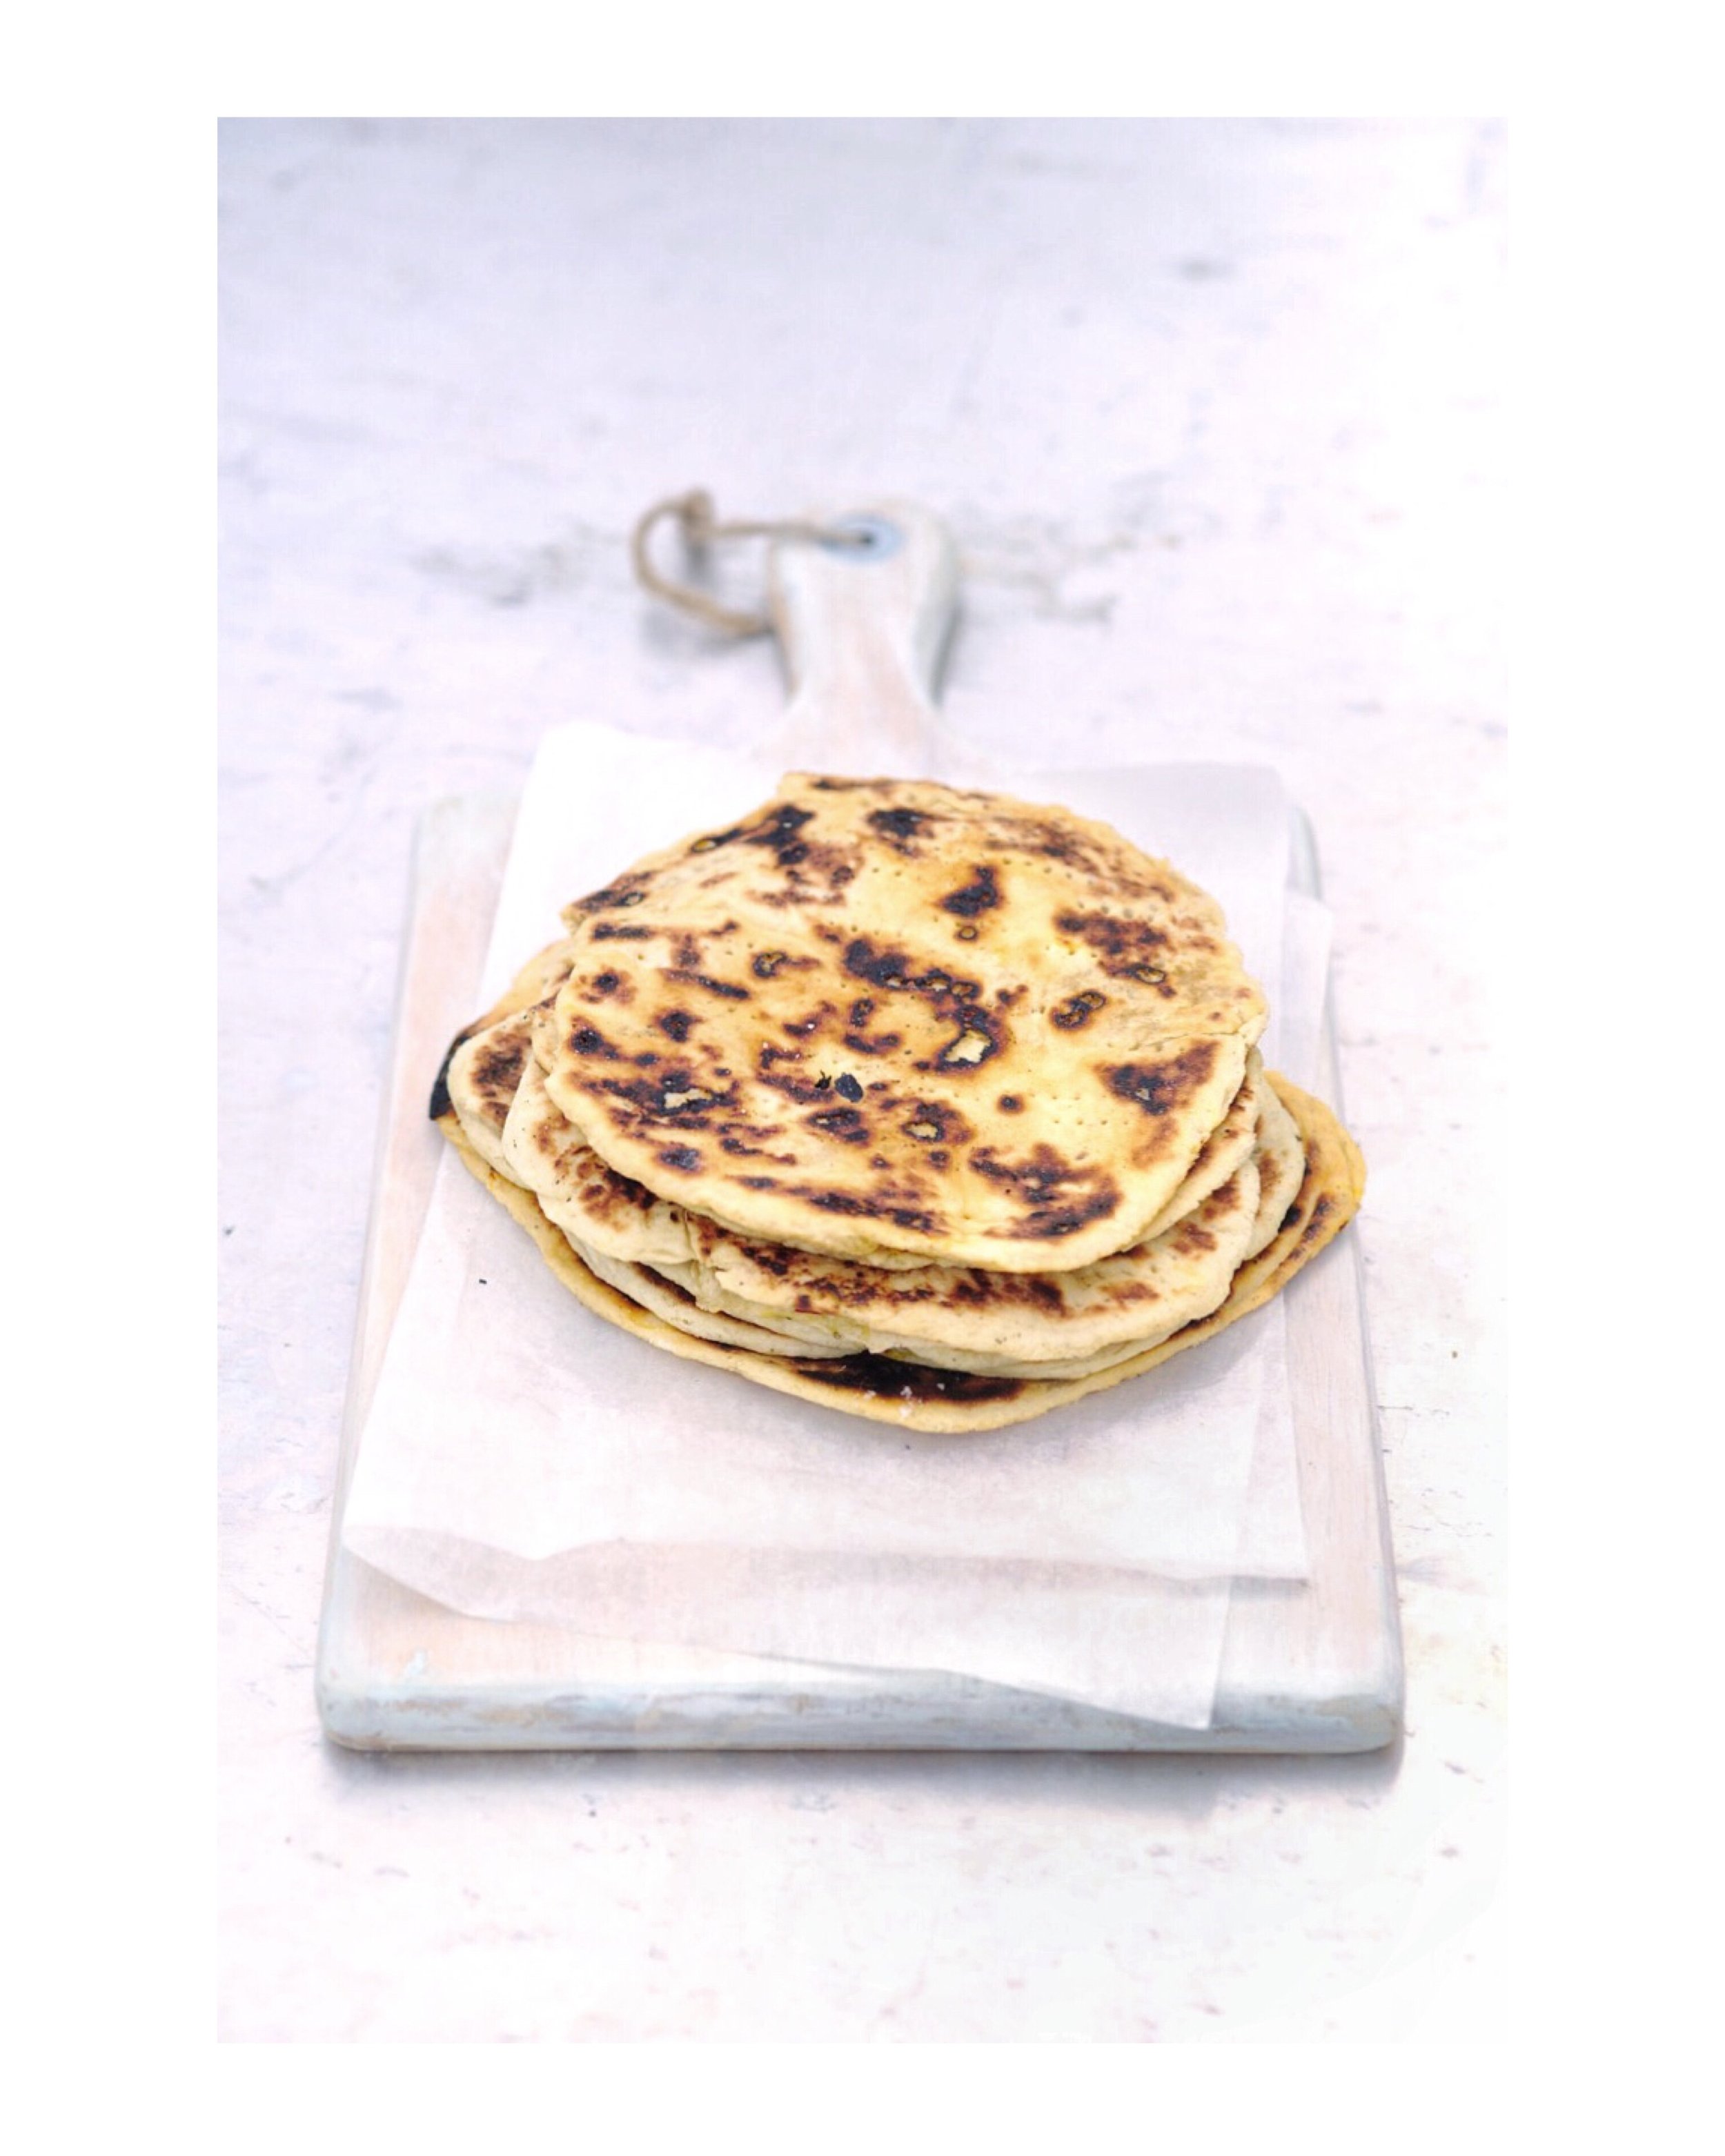 Sheermal: saffron and milk flatbreads spiced with cardamon